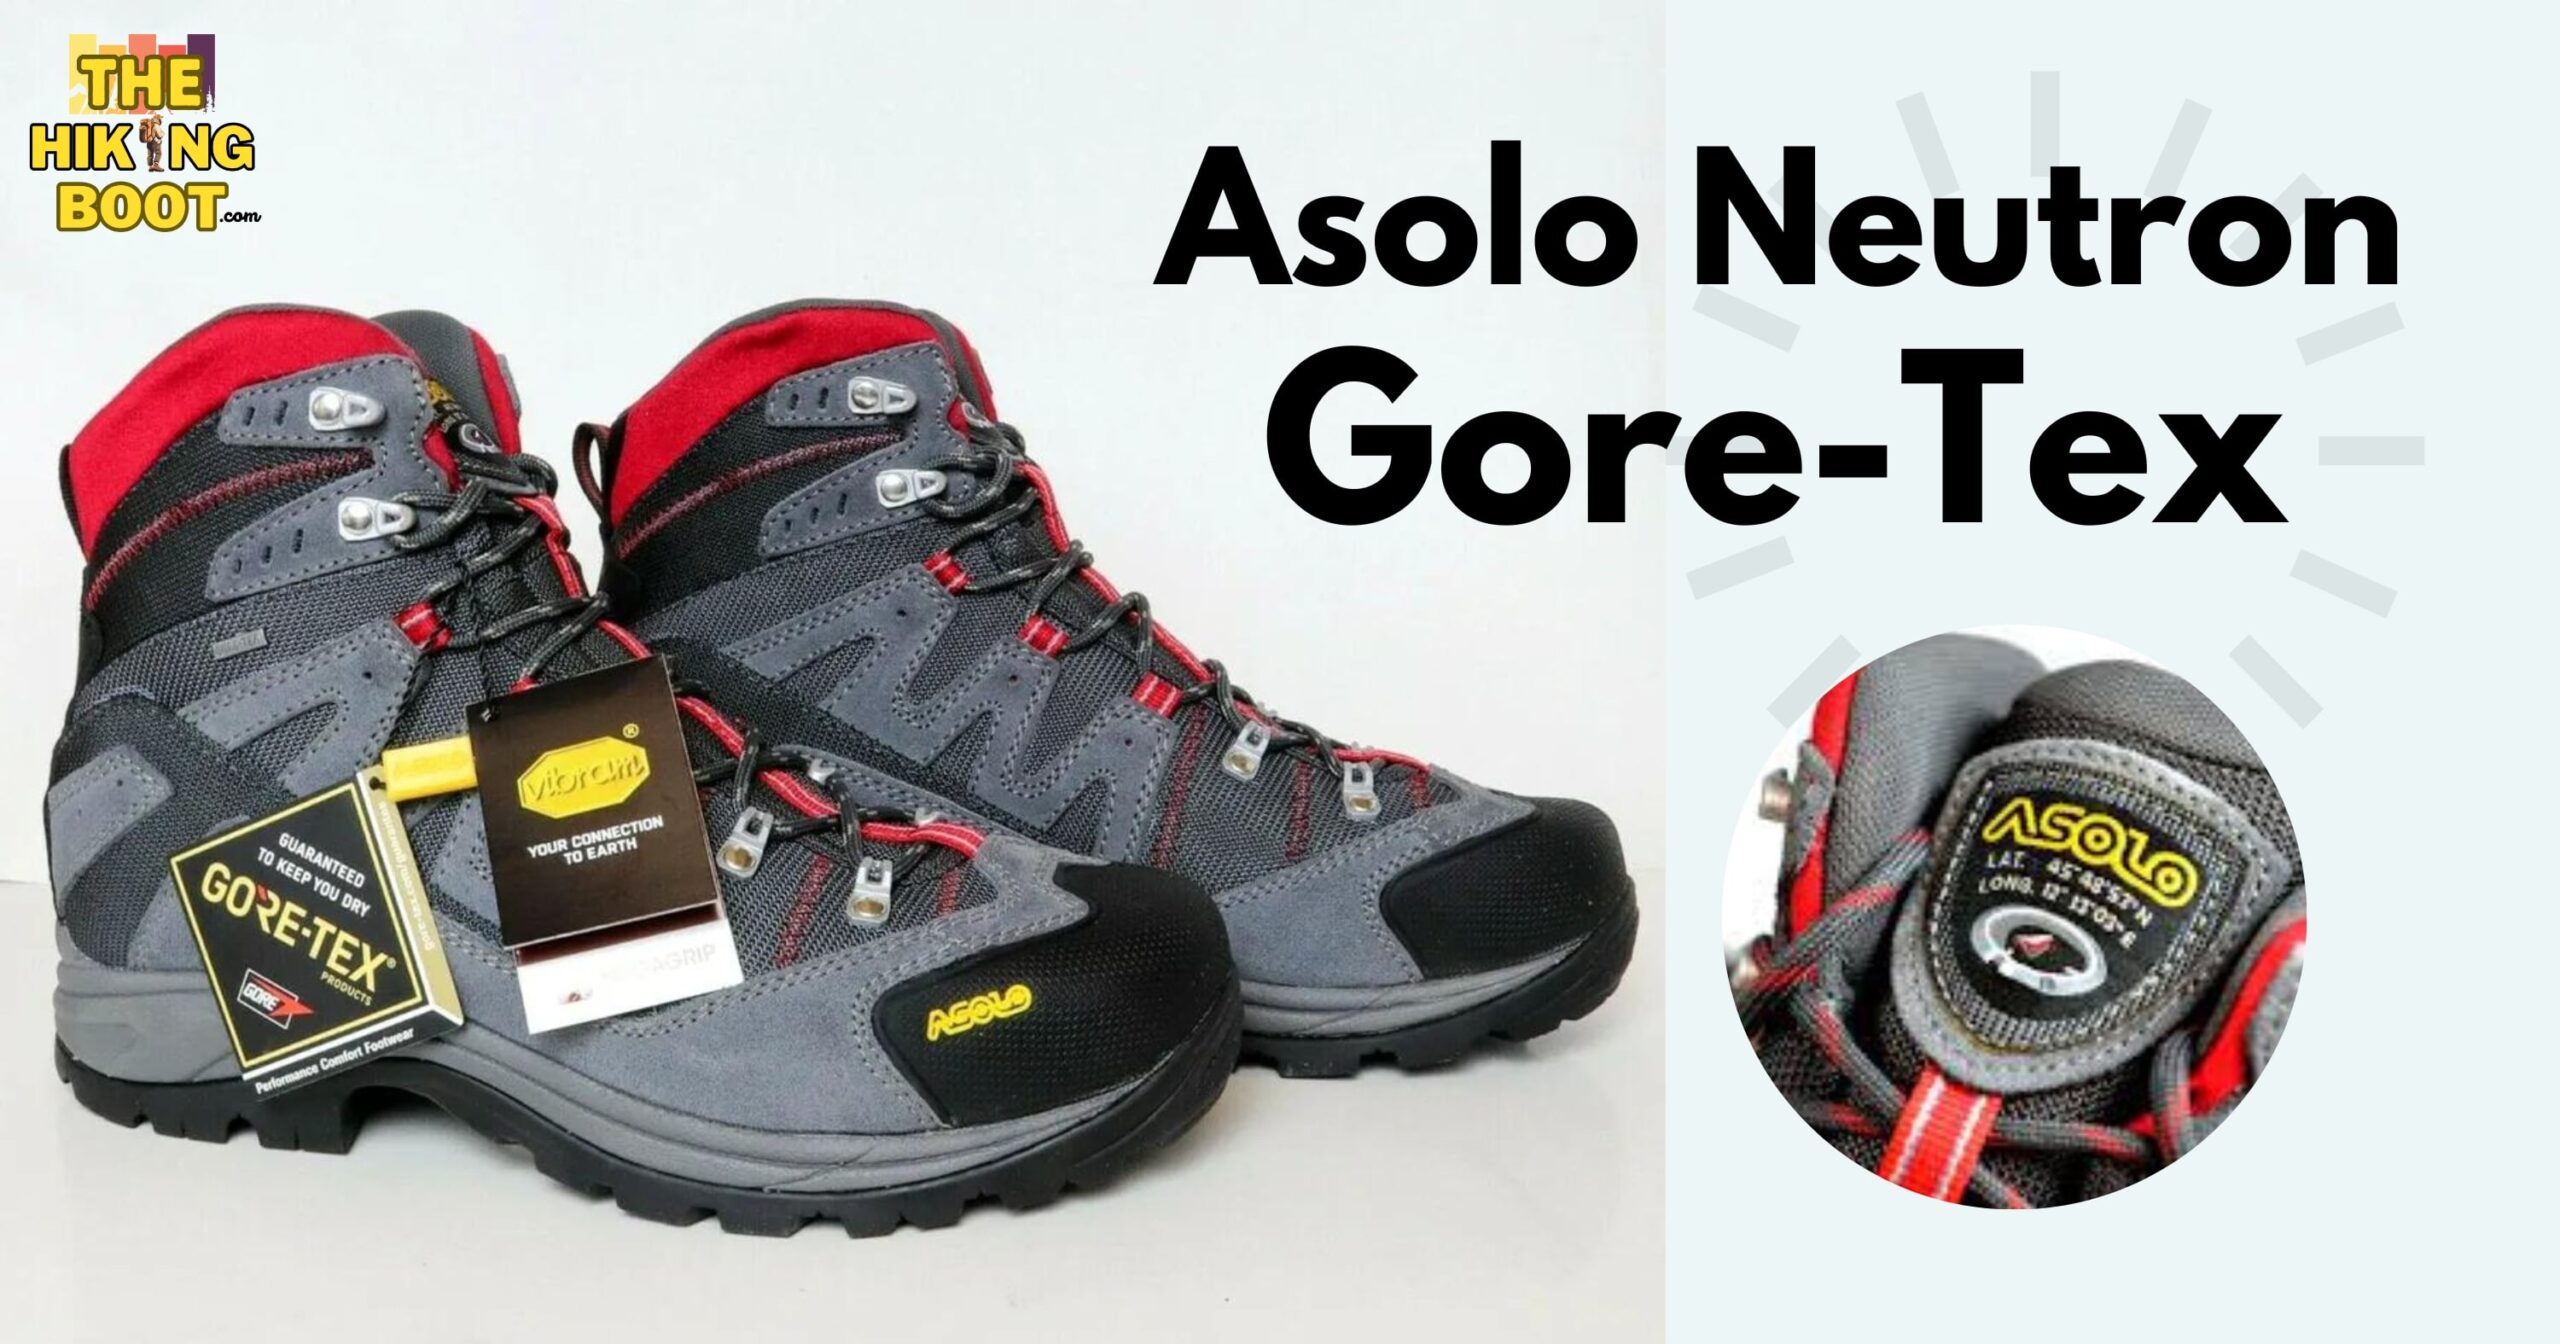 Asolo Neutron Gore-Tex Hiking Boots | Buying And Cleaning Guides